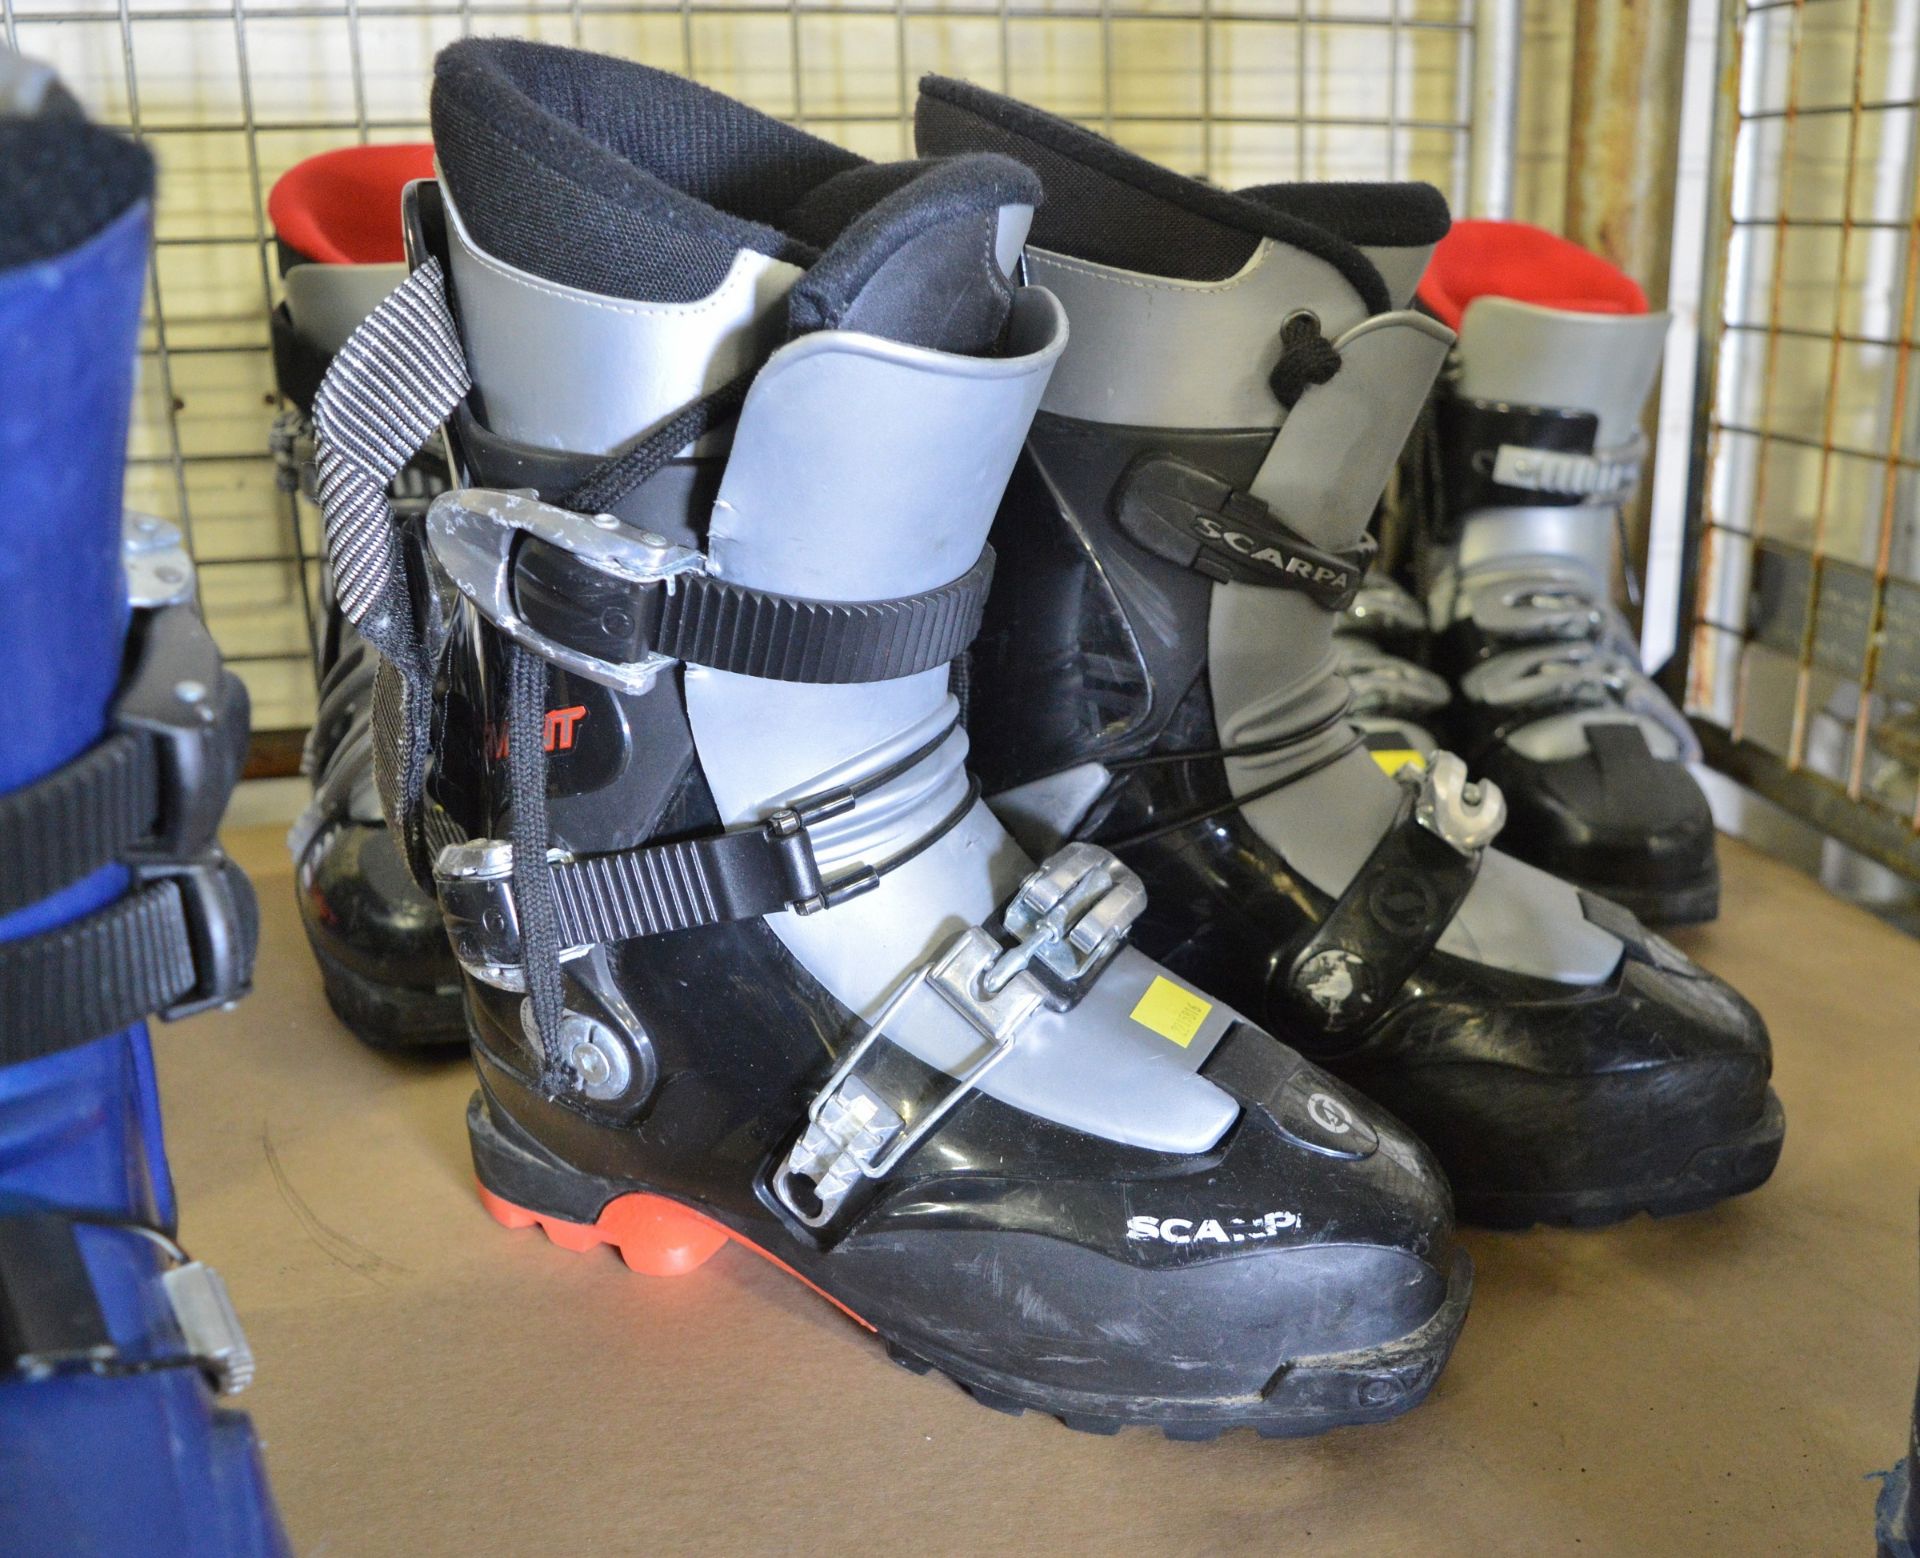 7x Pairs of Ski Boots - various makes & sizes - Image 3 of 4